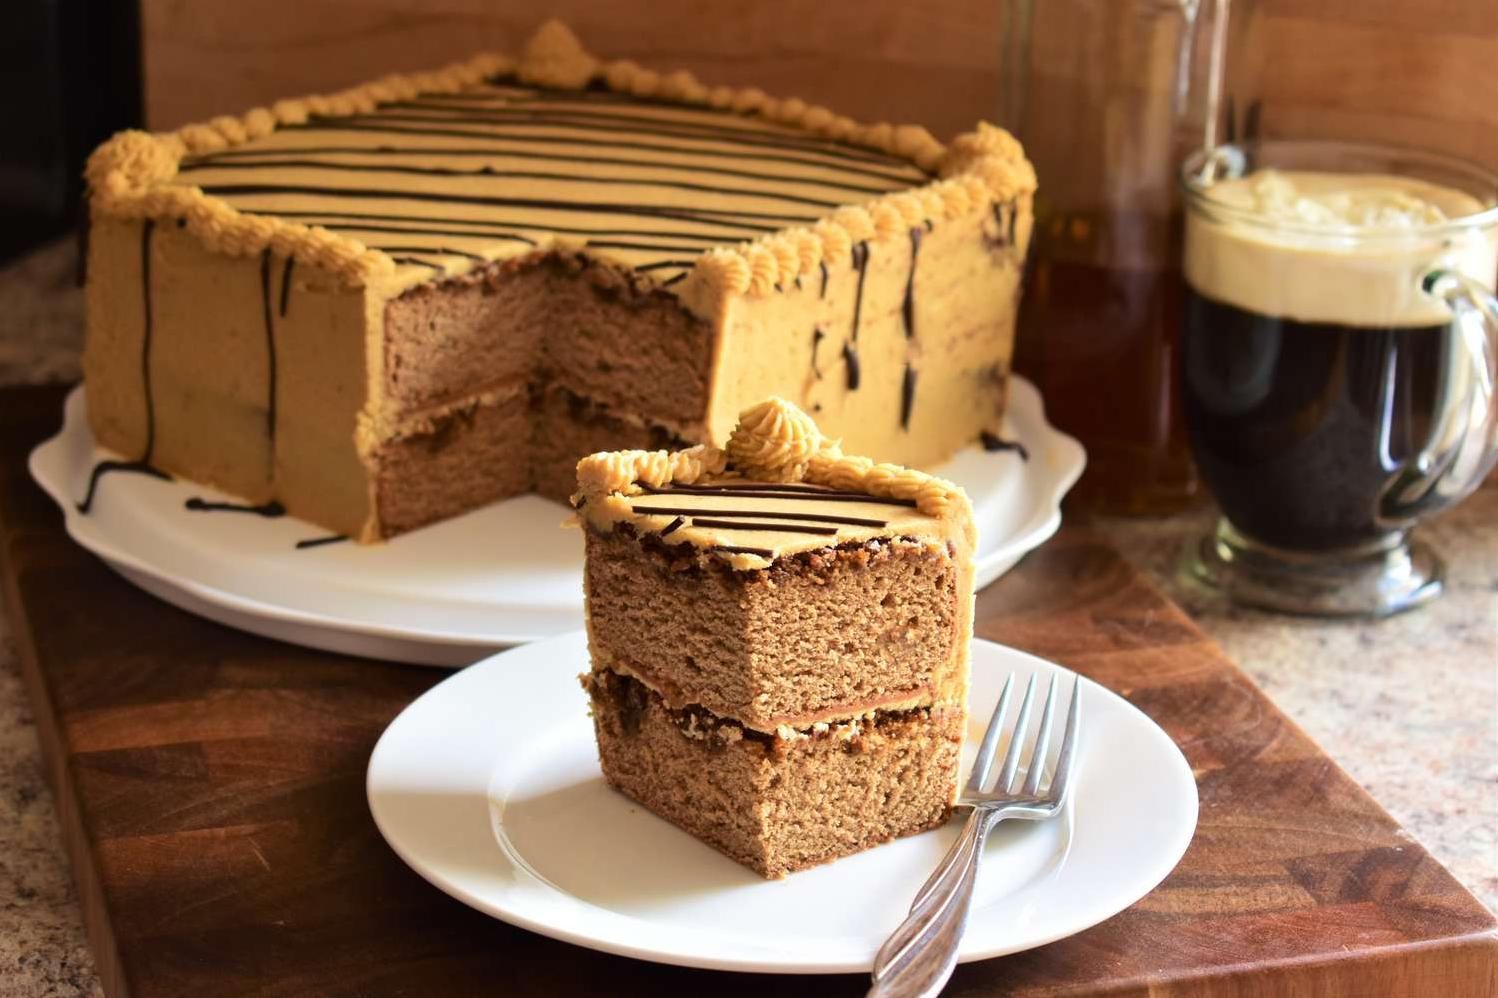  Enjoy a slice of this Irish cinnamon coffee cake with your favorite coffee blend for the ultimate breakfast indulgence.